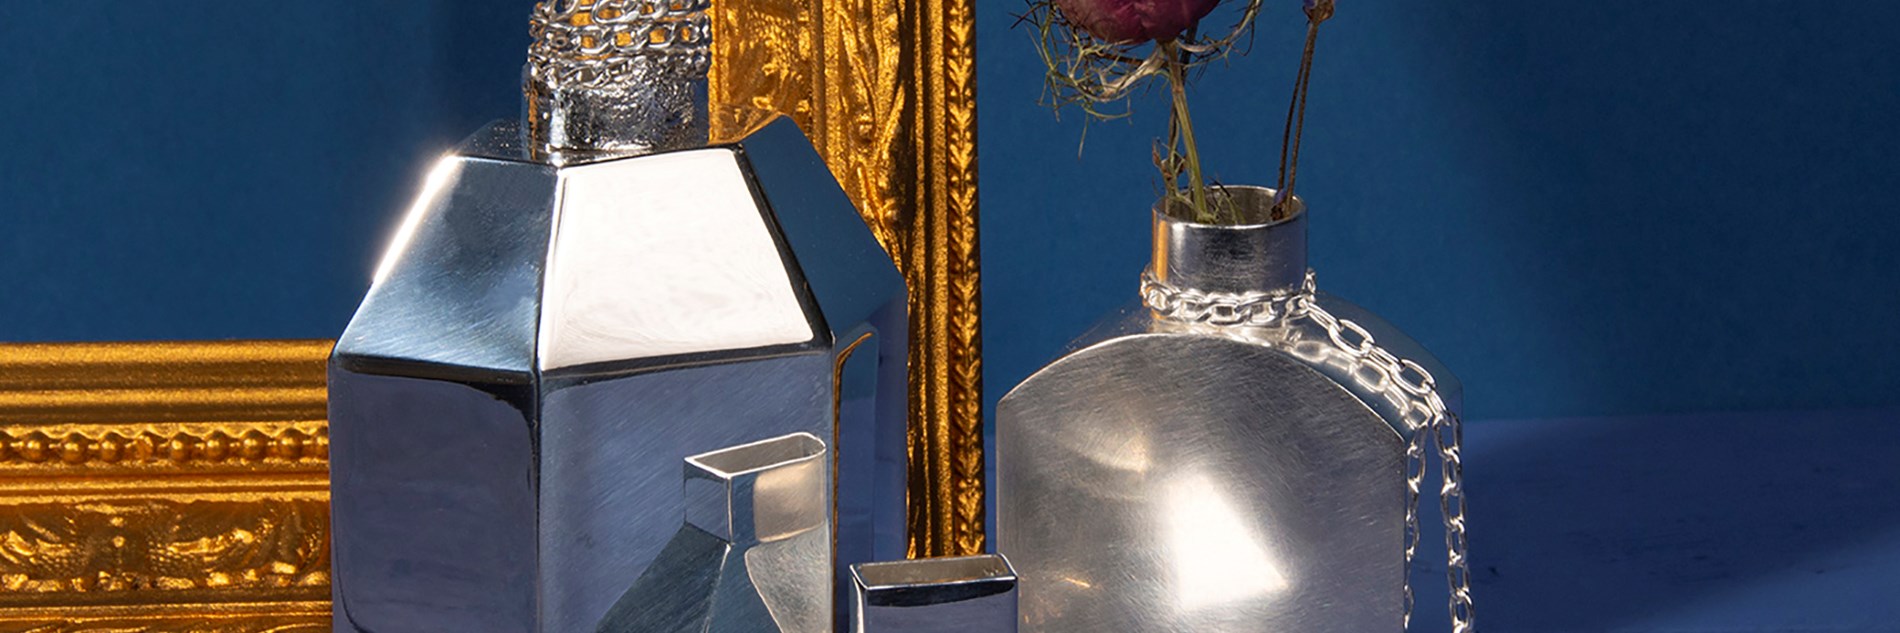 Three metal vases sitting next to a golden frame on a blue background. One of the vases is holding purple flowers. 